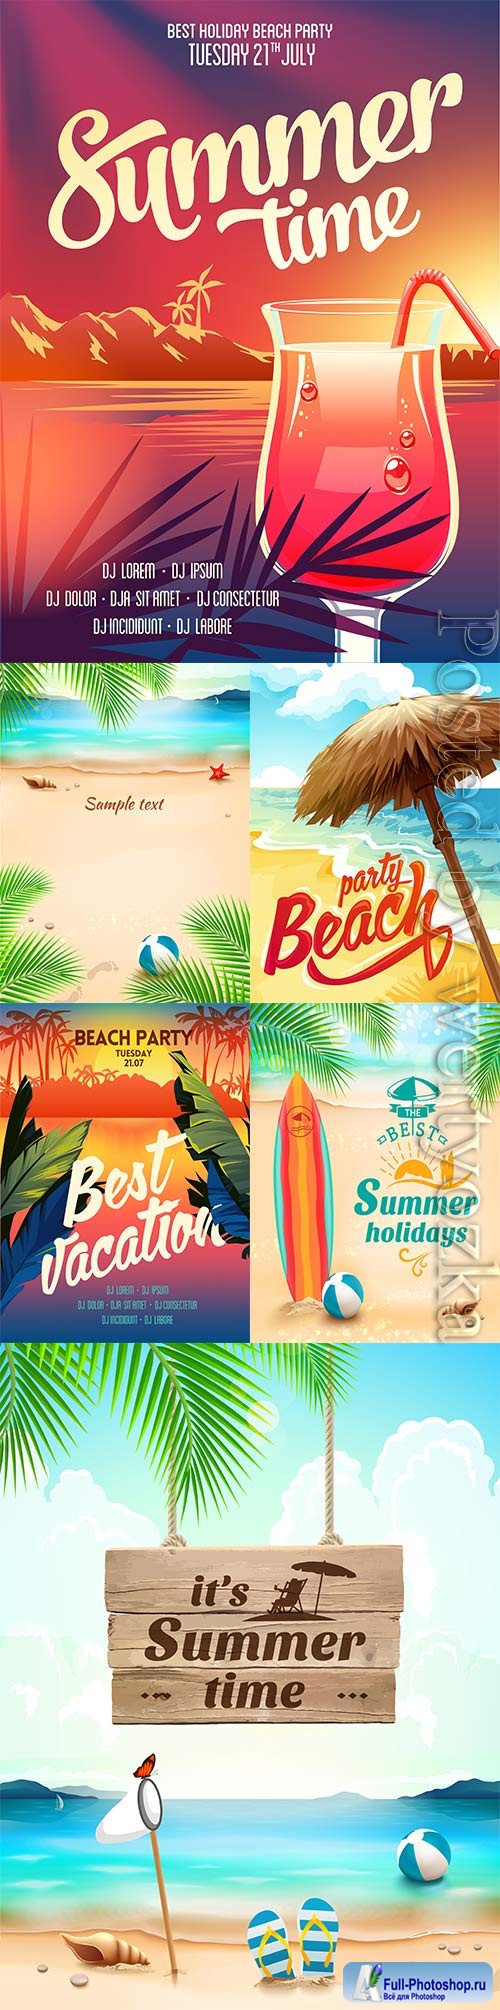 Summer vacation, sea, palm trees, cocktails in vector vol 10